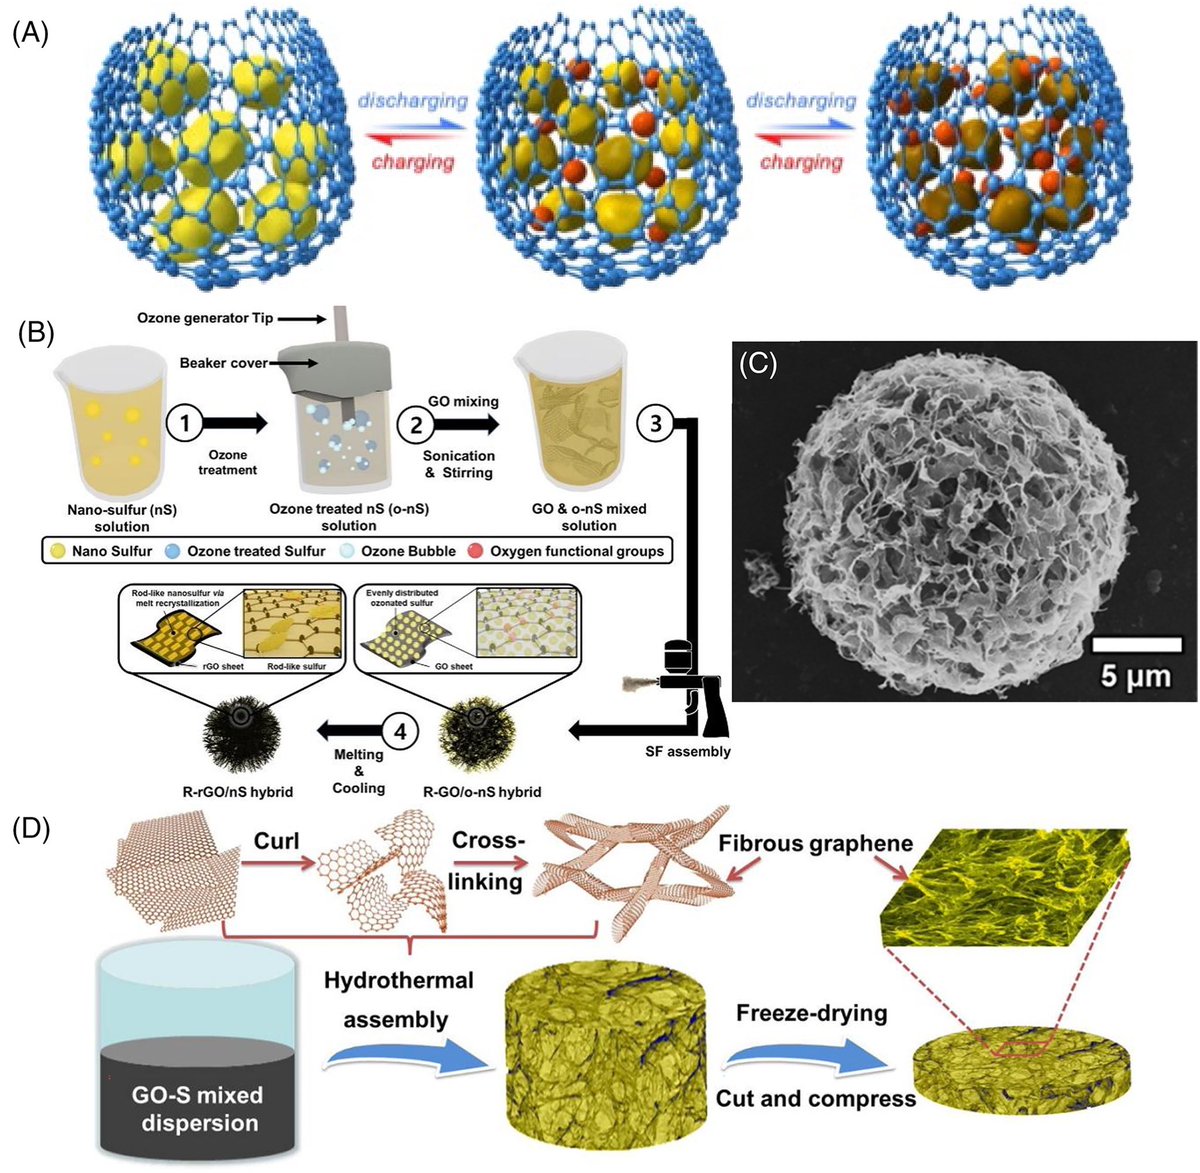 Review on recent advances in two-dimensional nanomaterials-based cathodes for lithium-sulfur batteries

@EcoMat2019 #chemistry #MaterialScience #Materials #Batteries #NanoMaterial #cathodes #EnergyScience #Energy 

onlinelibrary.wiley.com/doi/10.1002/eo…